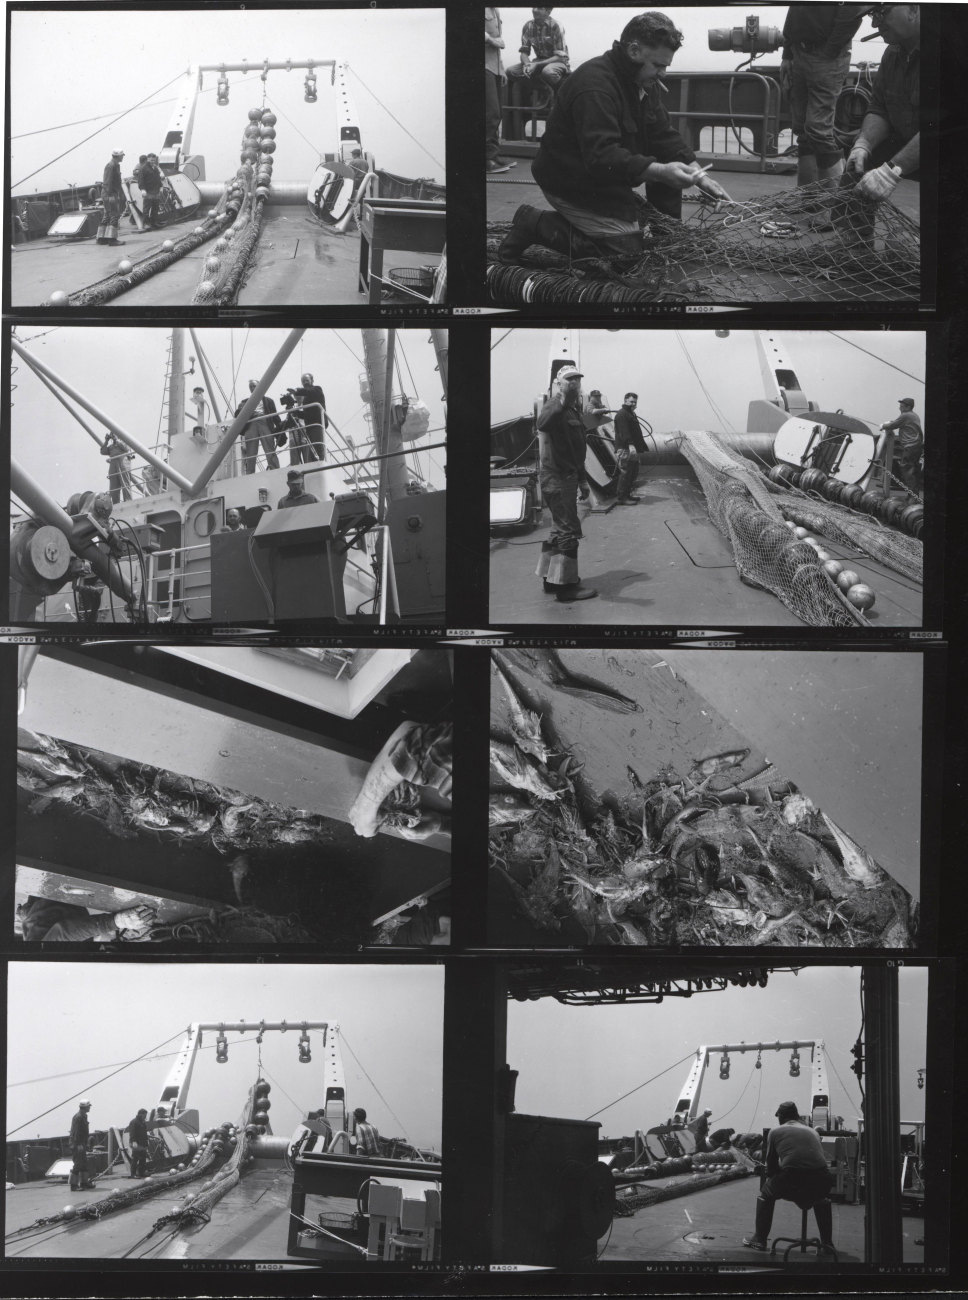 Operations on the ALBATROSS IV - probably 1963 cruise